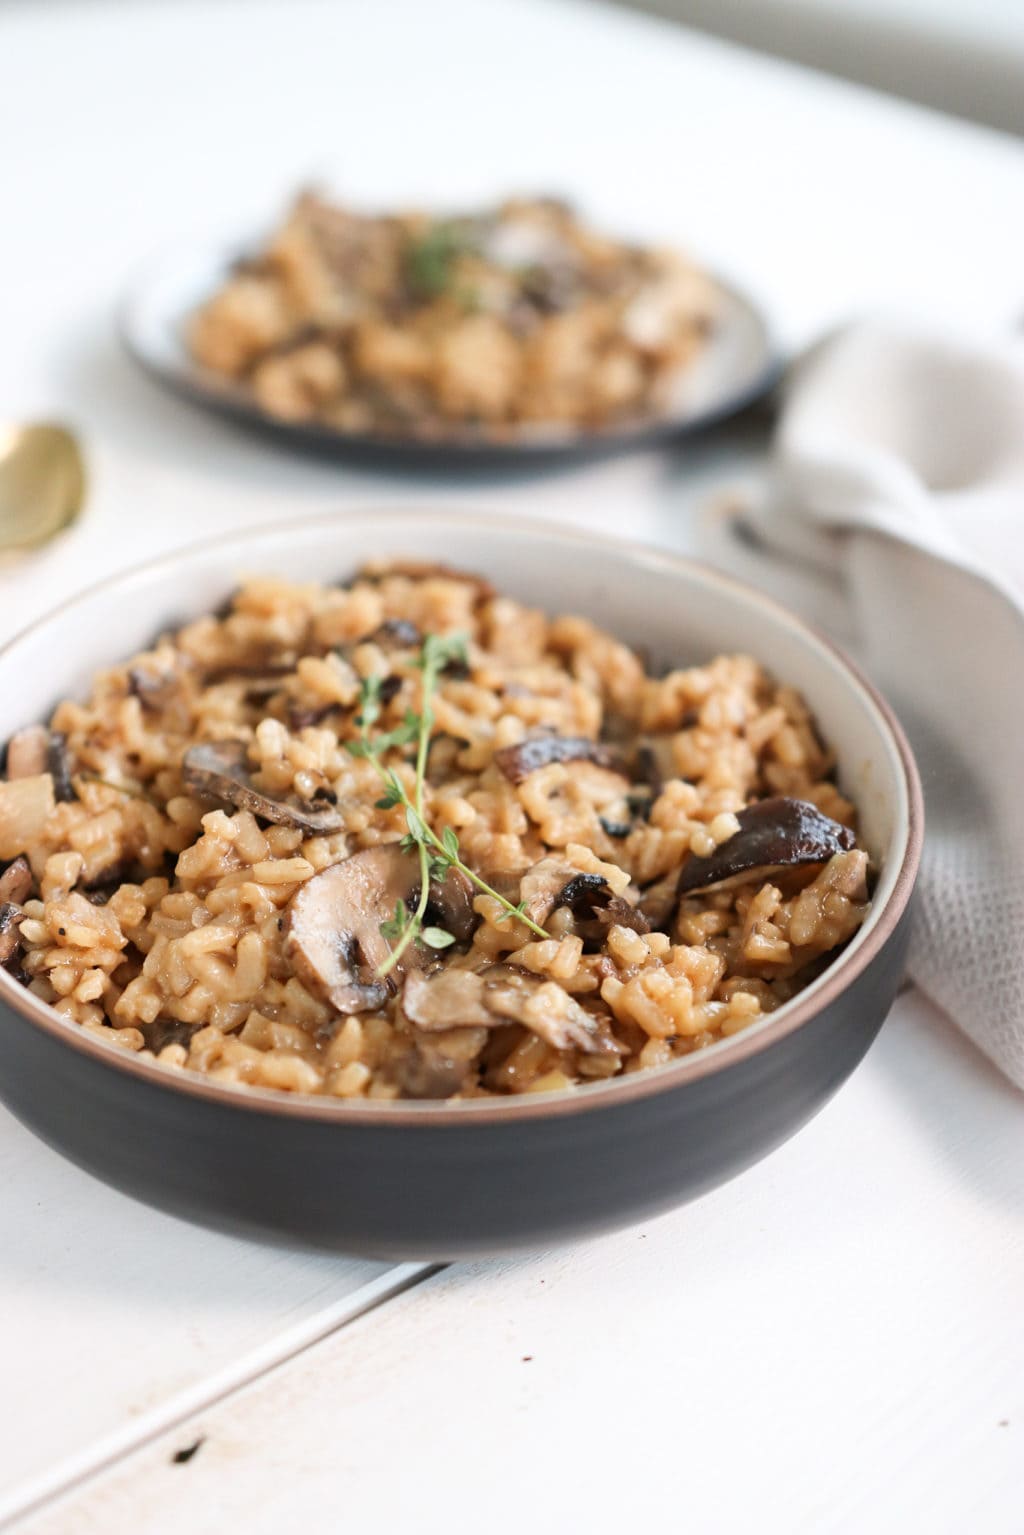 Creamy mushroom risotto in a white and brown bowl over a white food board. Ingredients include: mushrooms, garlic, parsley, arborio rice, white wine, vegetable stock, parmesan, butter